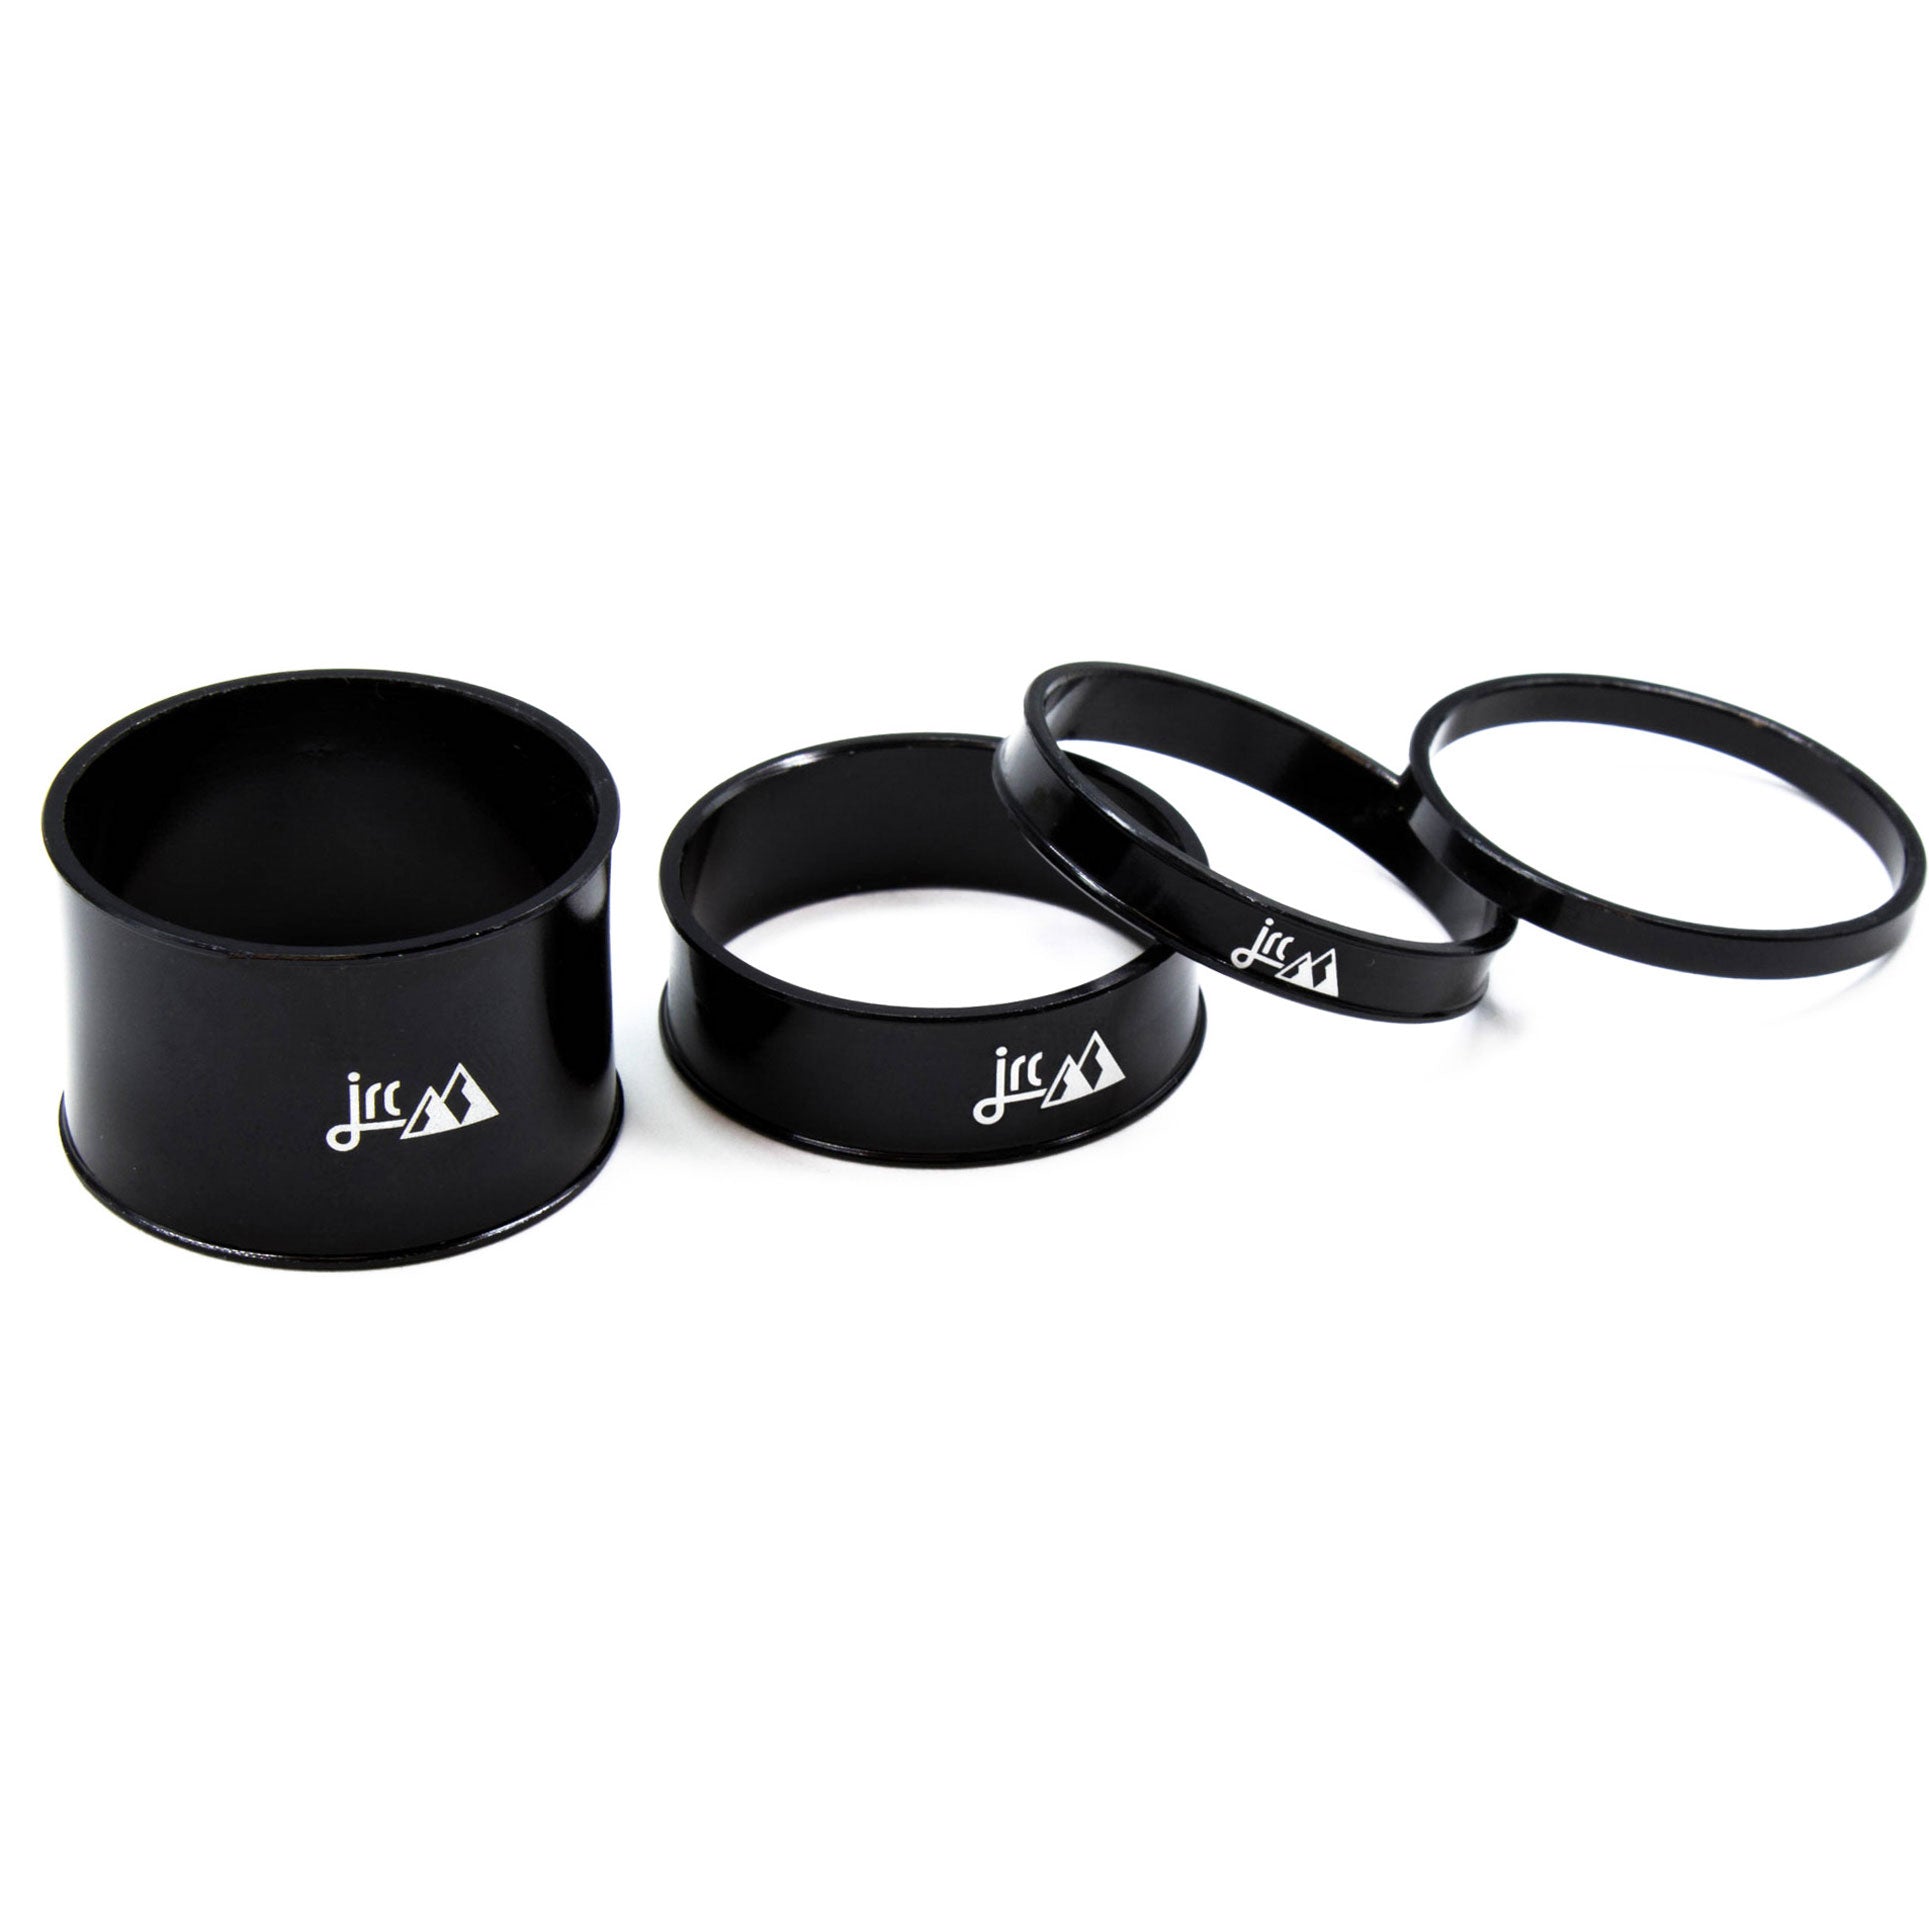 Black, lightweight aluminium bicycle headset spacer kit with 4 sizes.